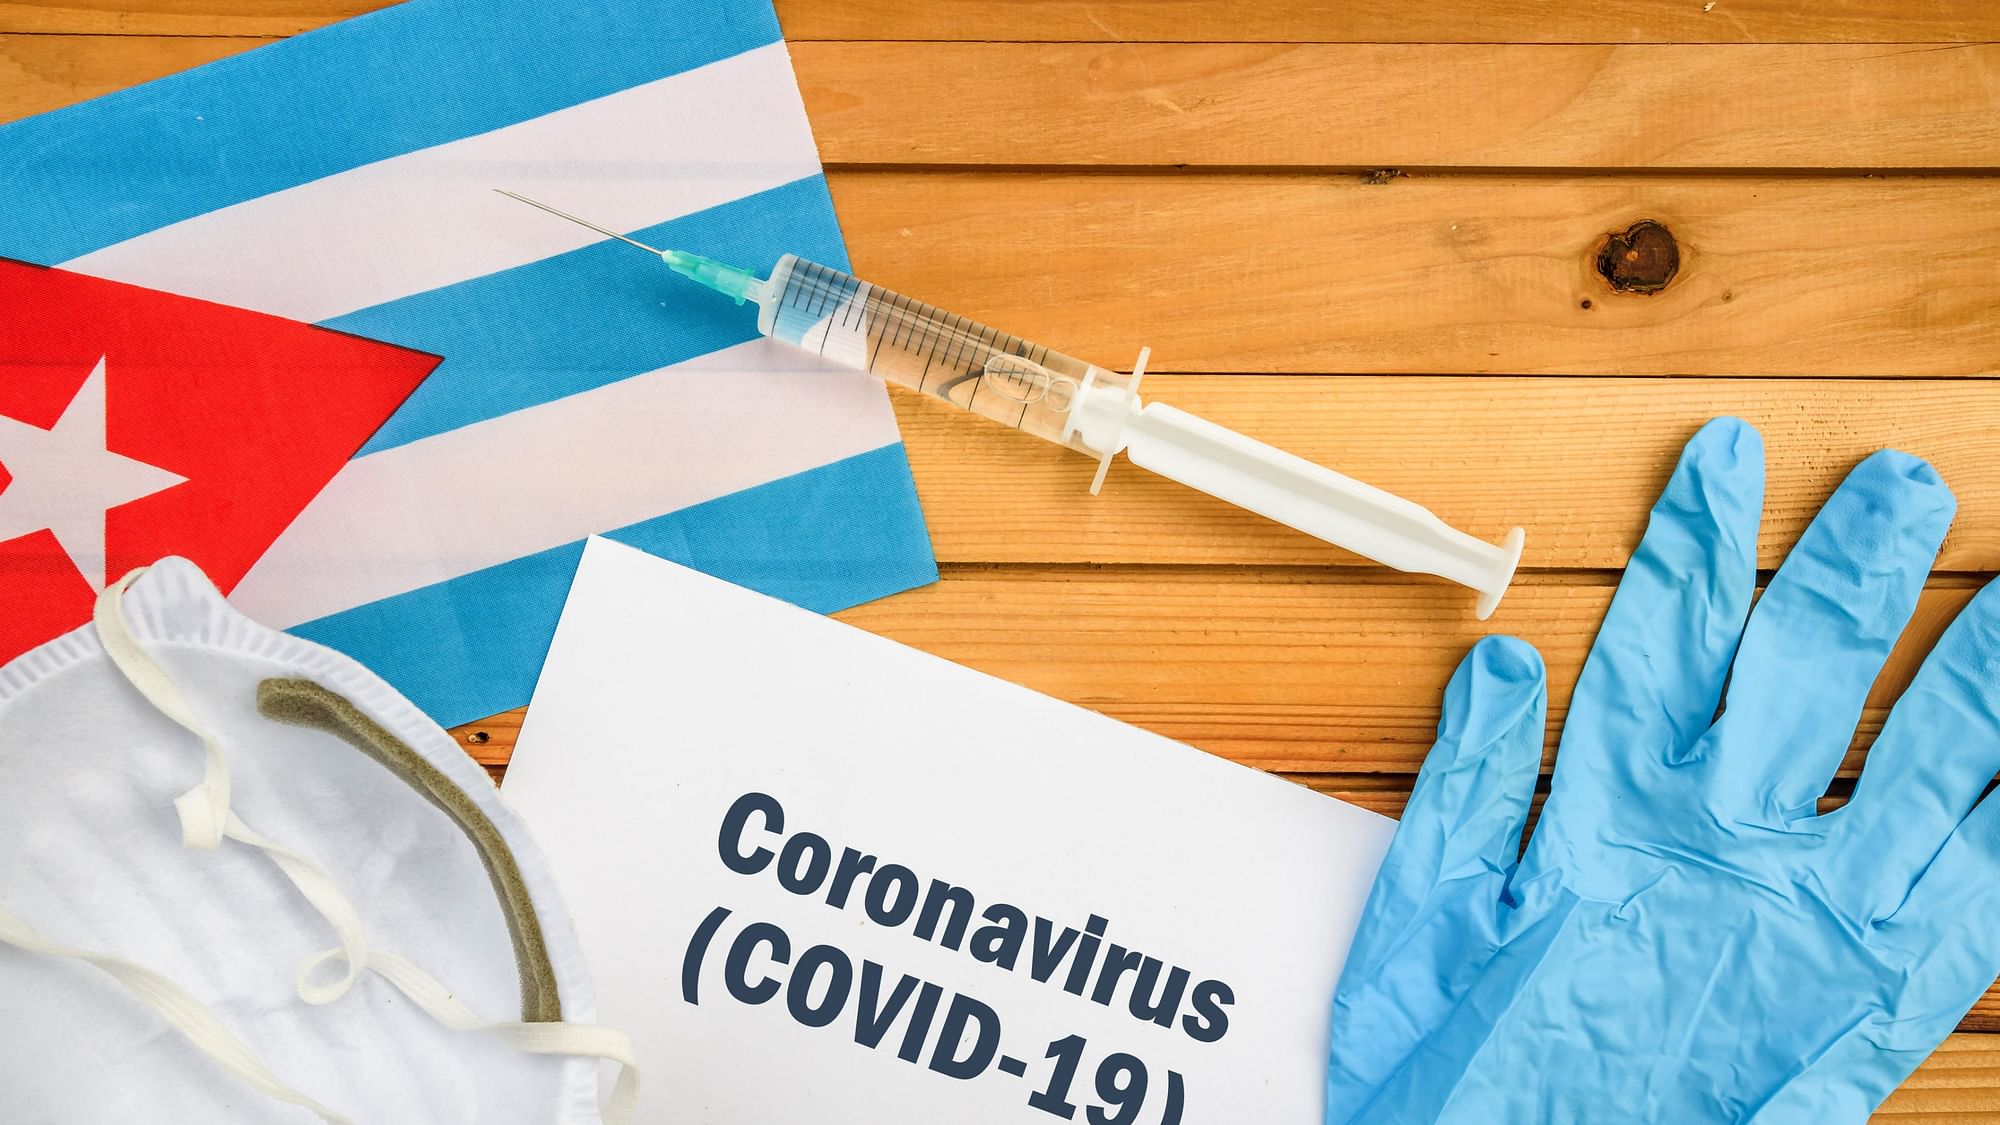 COVID-19 response: Here’s why Cuba makes for an interesting case.